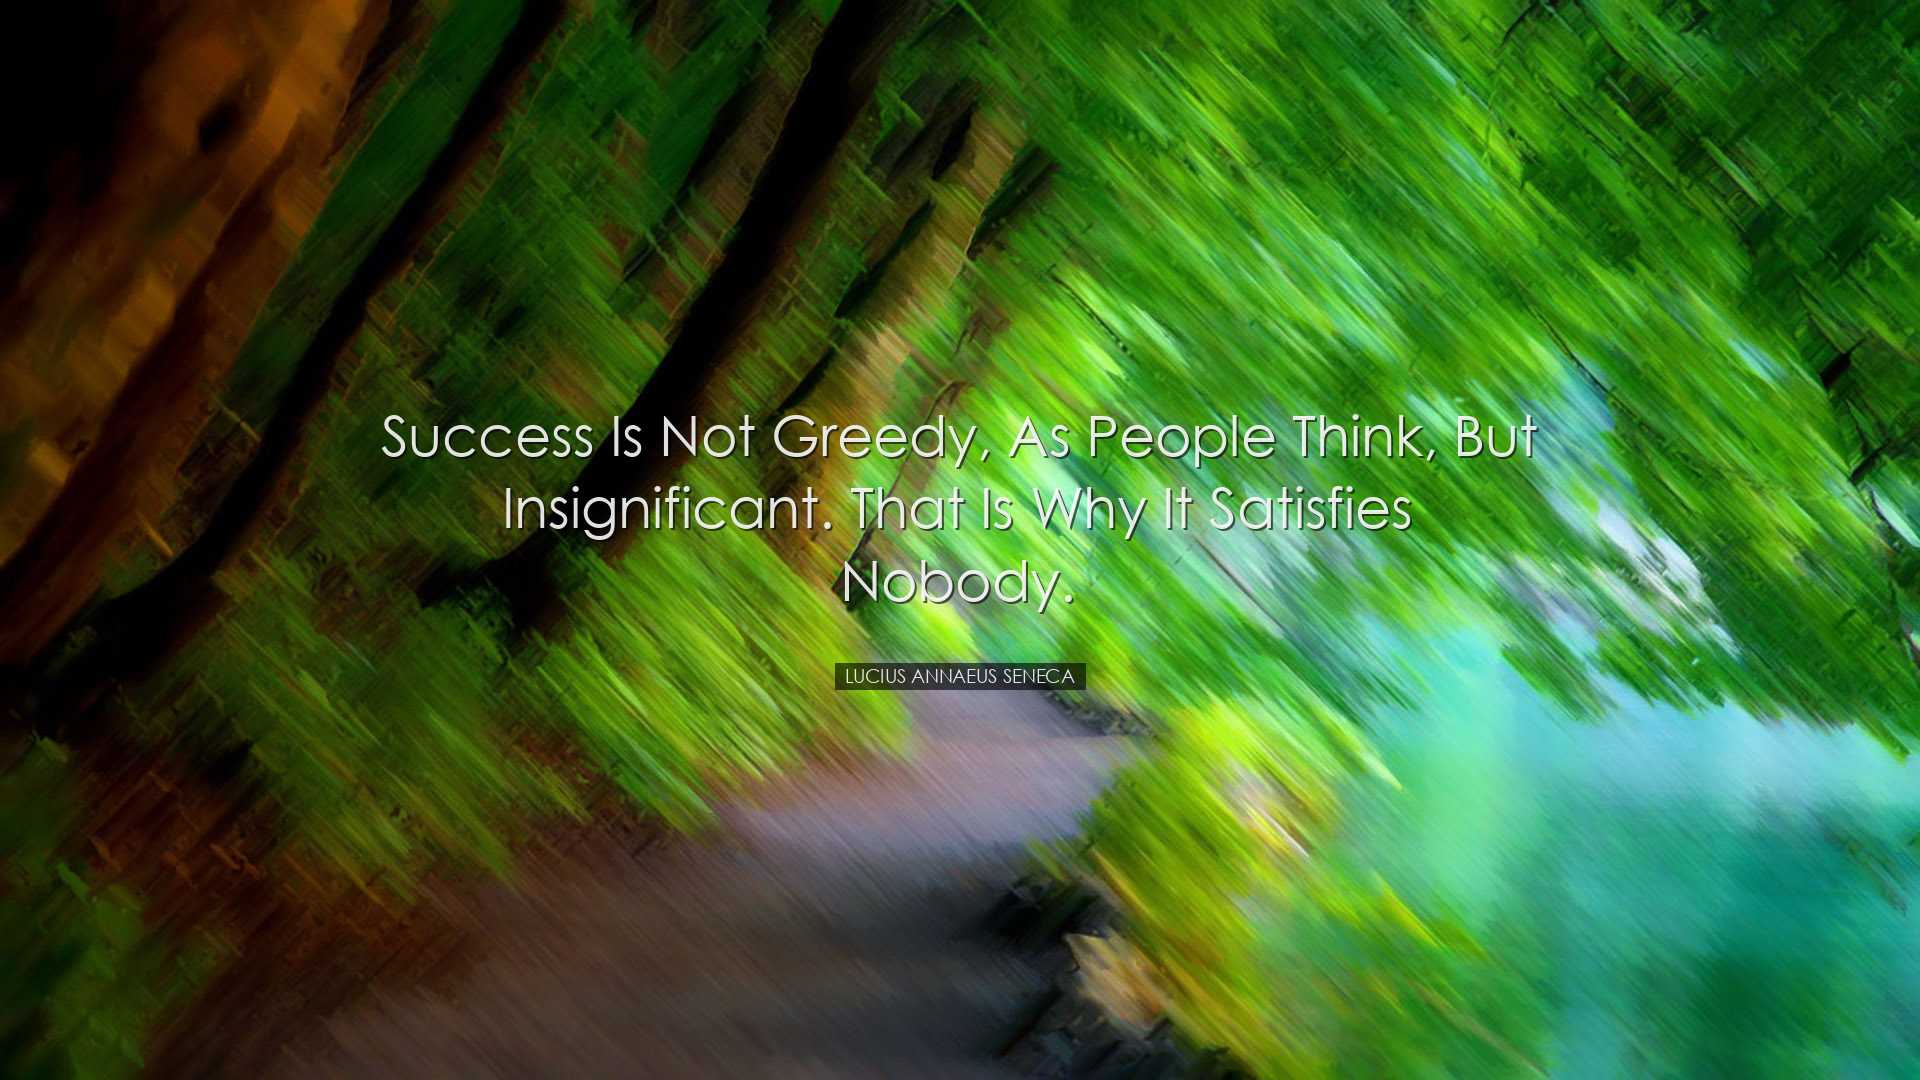 Success is not greedy, as people think, but insignificant. That is